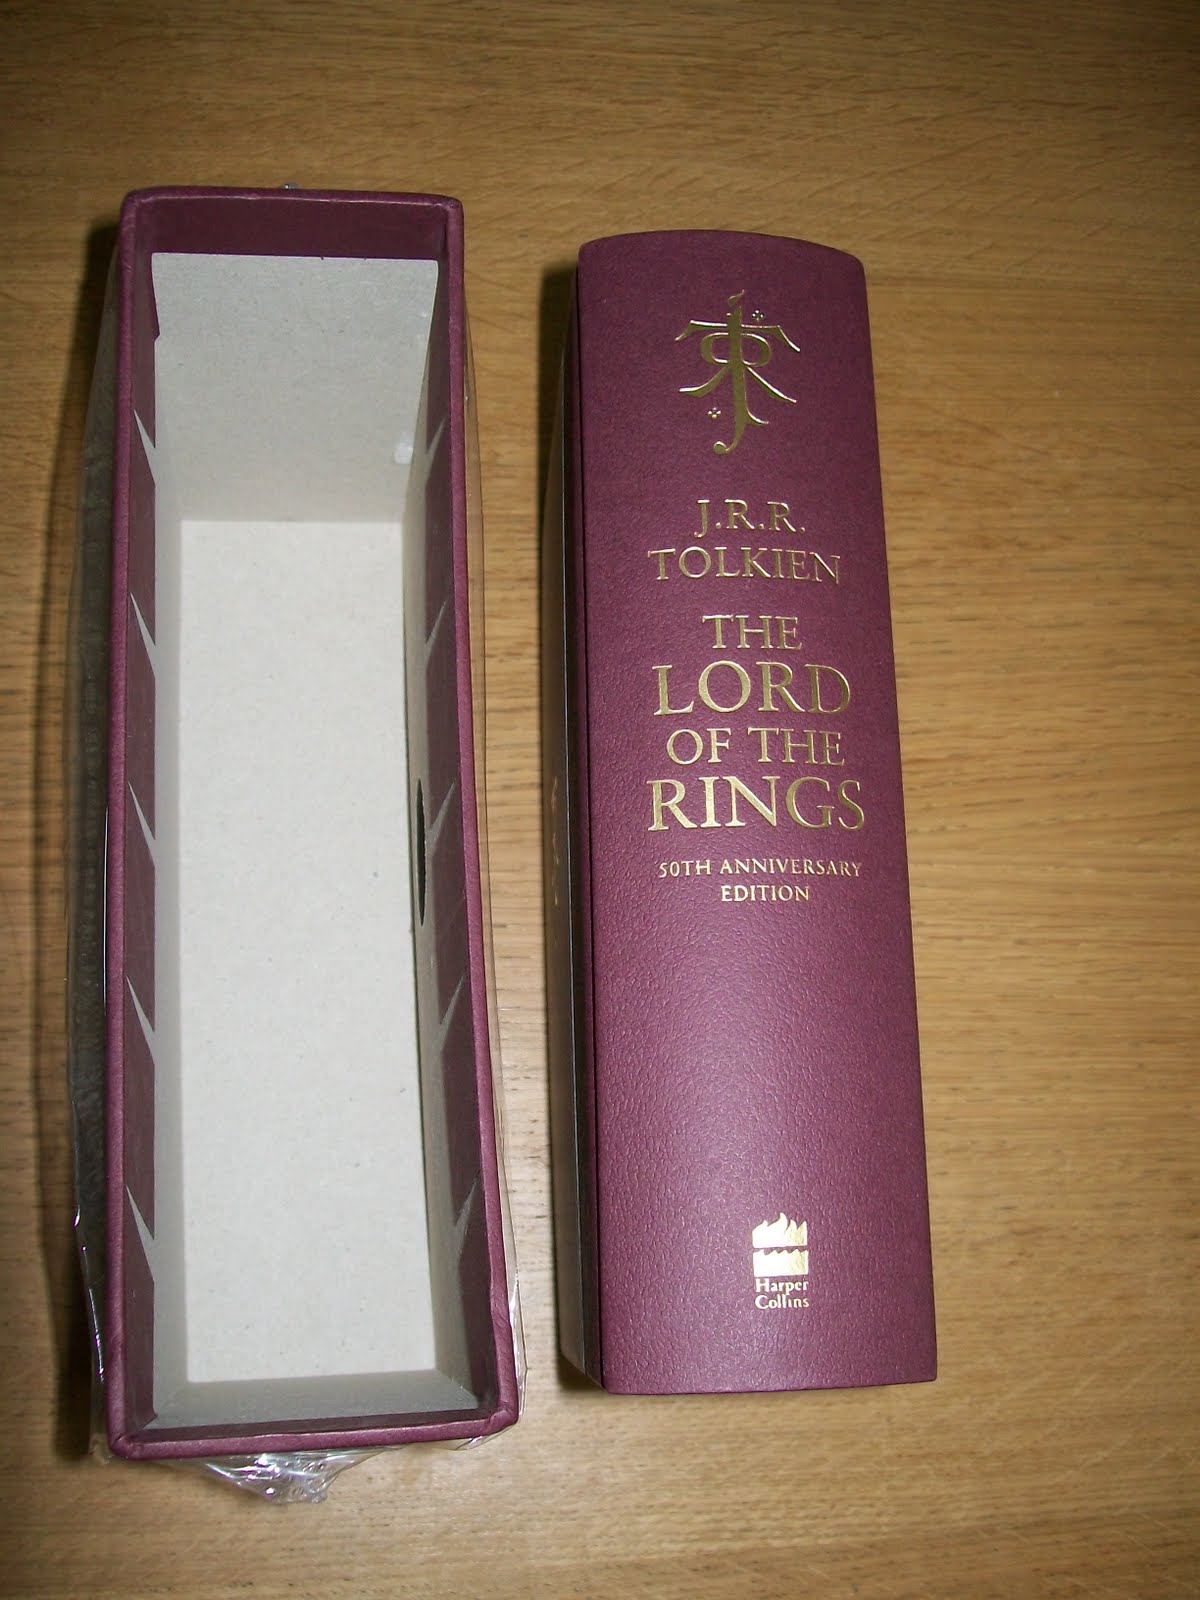 The Lord of the Rings, 50th Anniversary UK Deluxe Edition, 2nd Impression, J. R. R. Tolkien